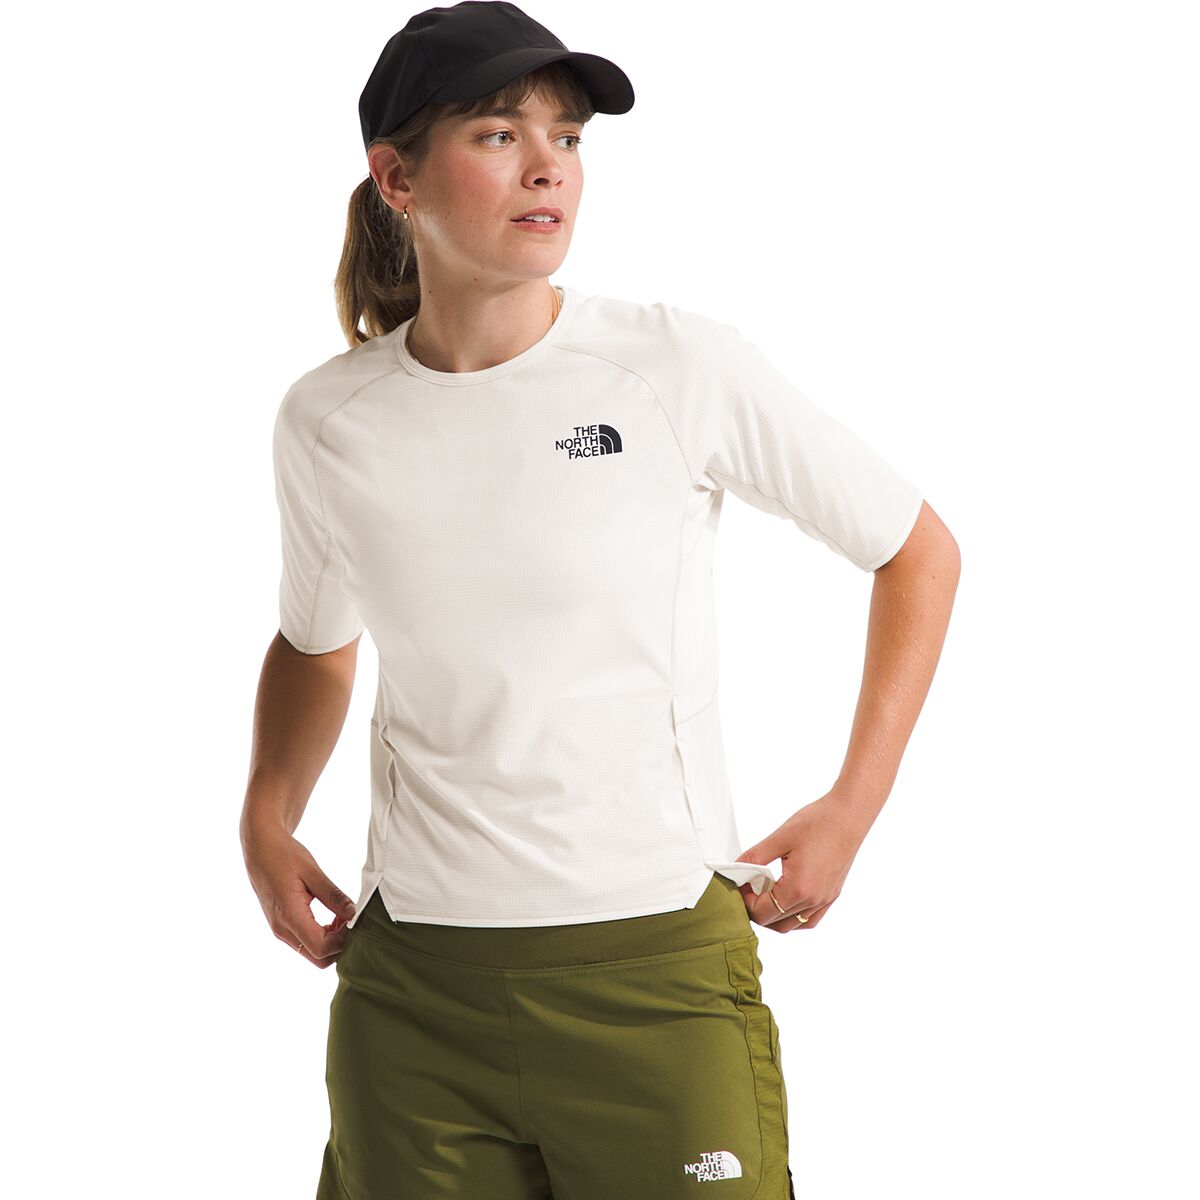 The North Face Women's Tops